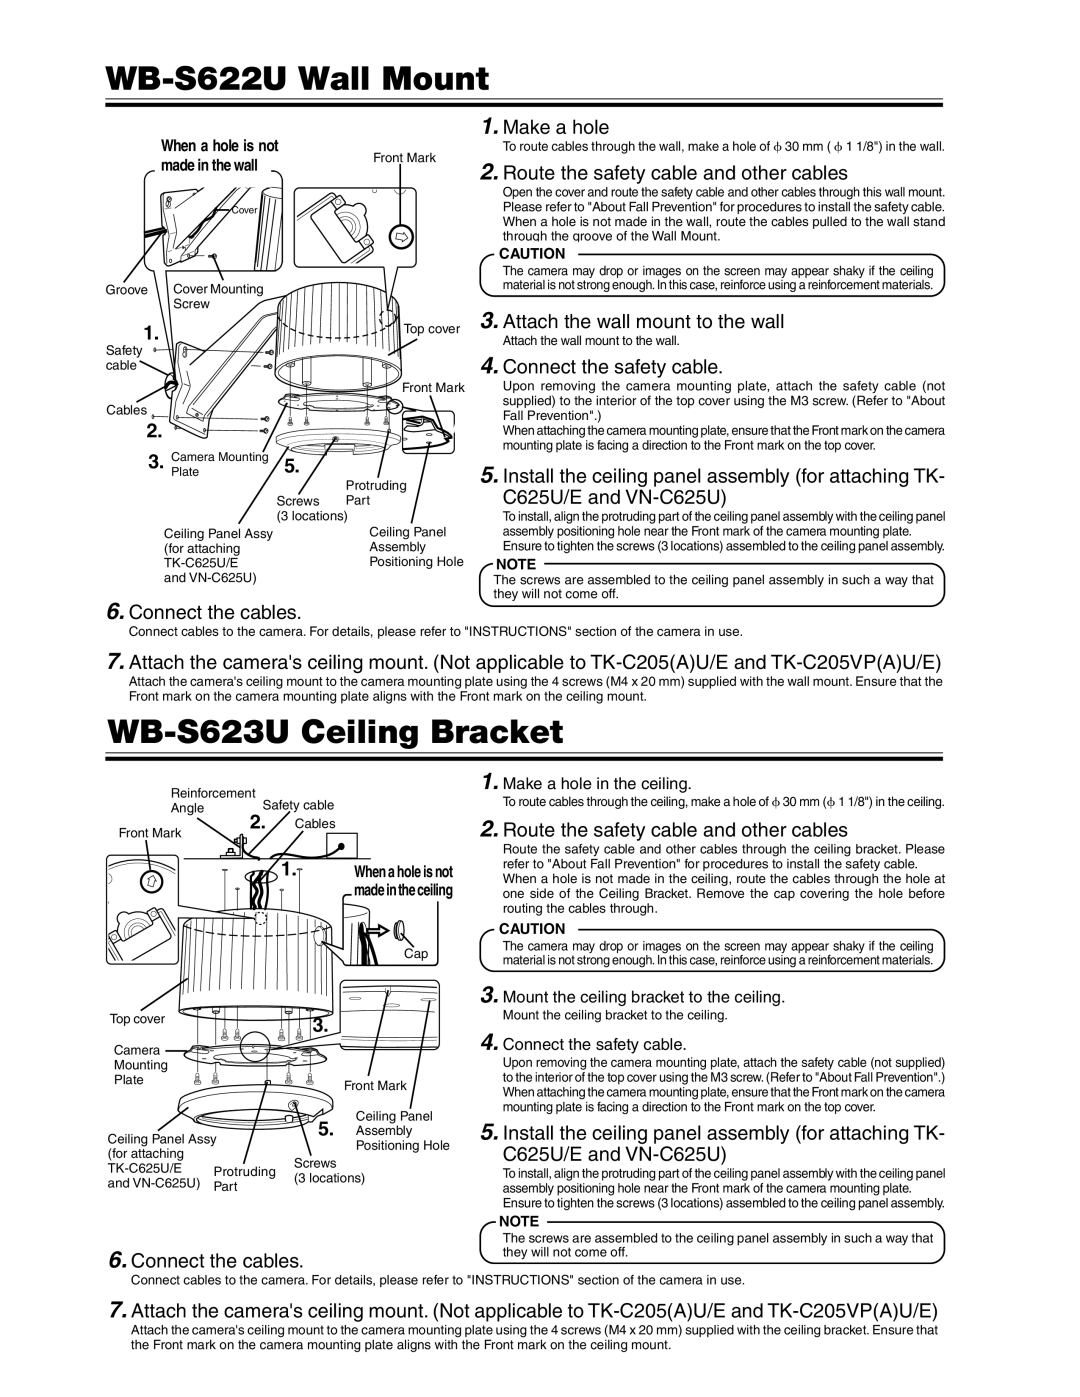 JVC WB-S621U WB-S622U Wall Mount, WB-S623U Ceiling Bracket, Make a hole in the ceiling, Connect the safety cable 